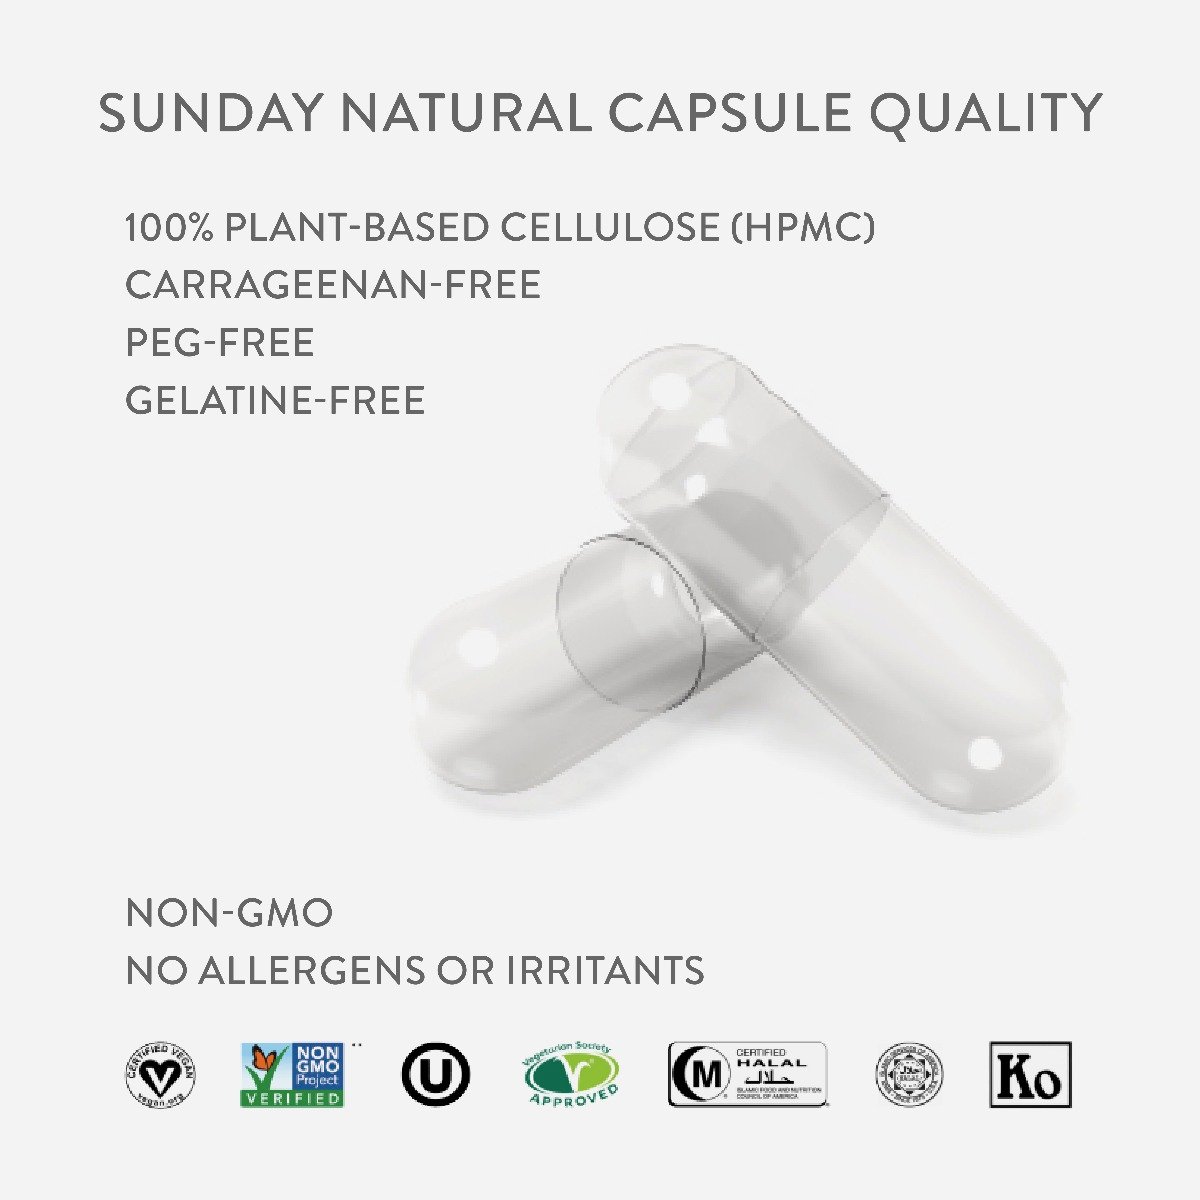 Sunday Natural Capsule Quality